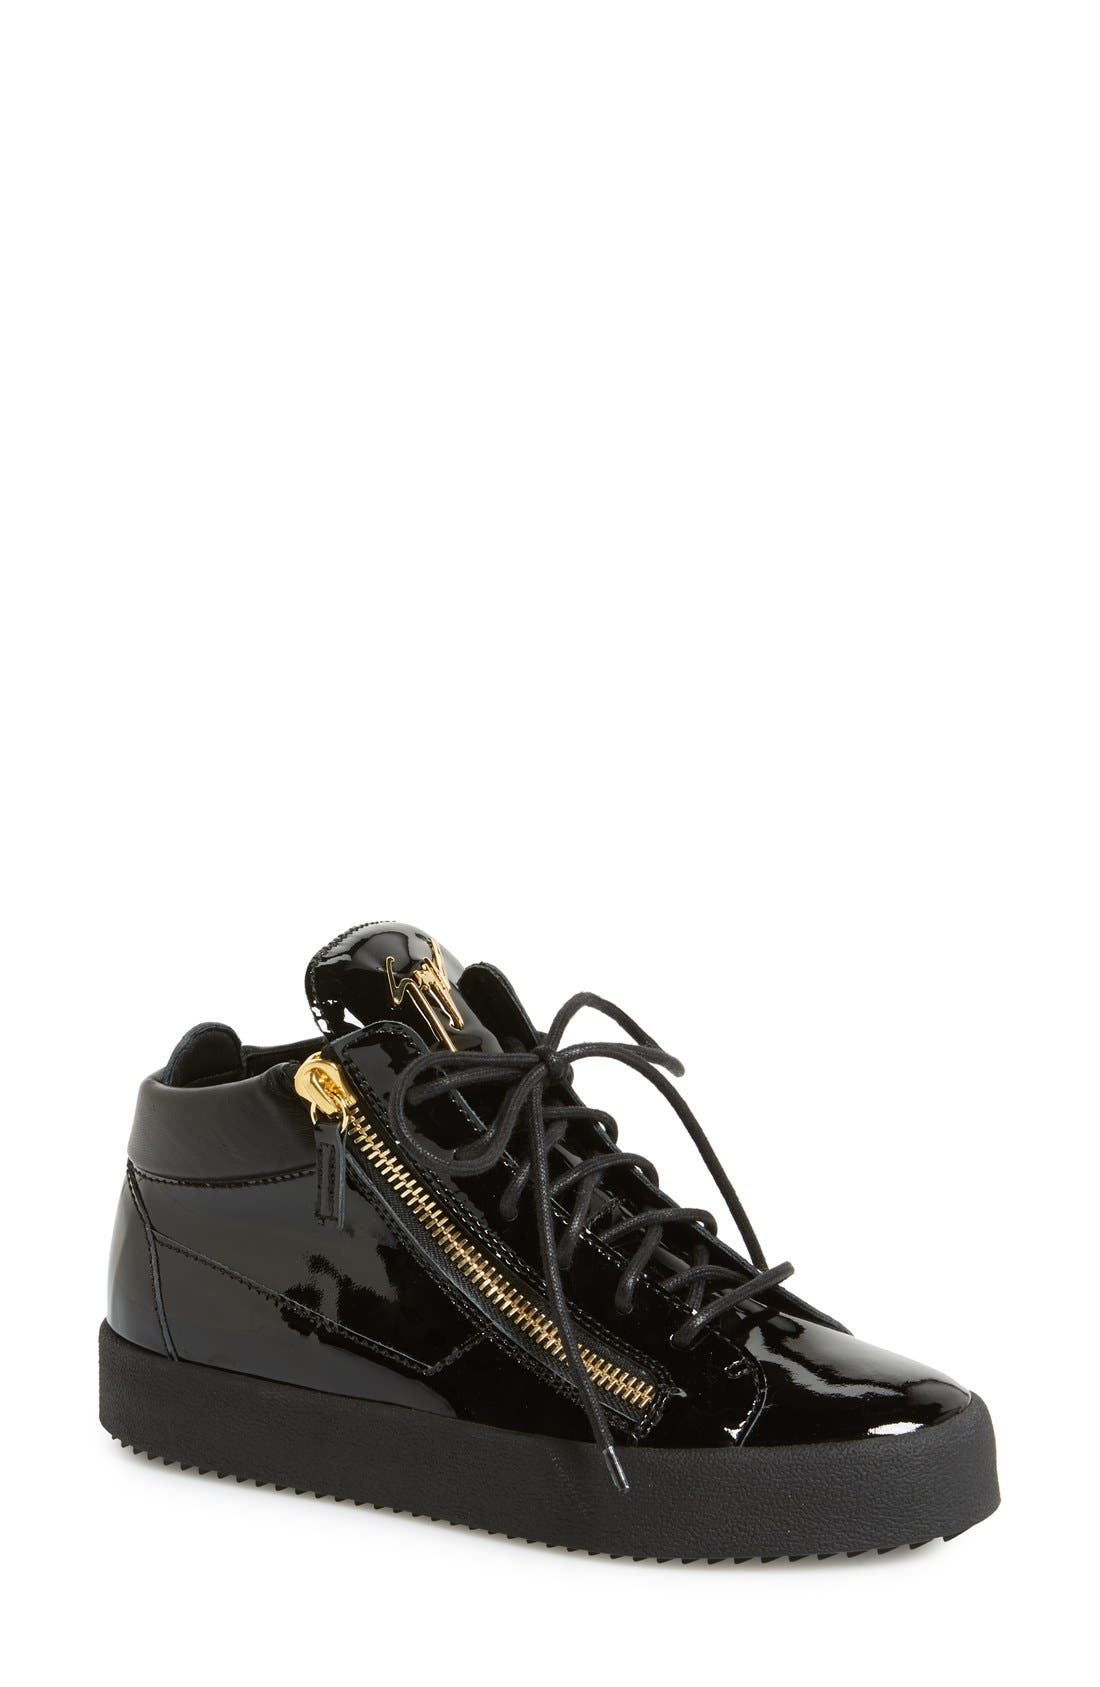 patent leather high top sneakers